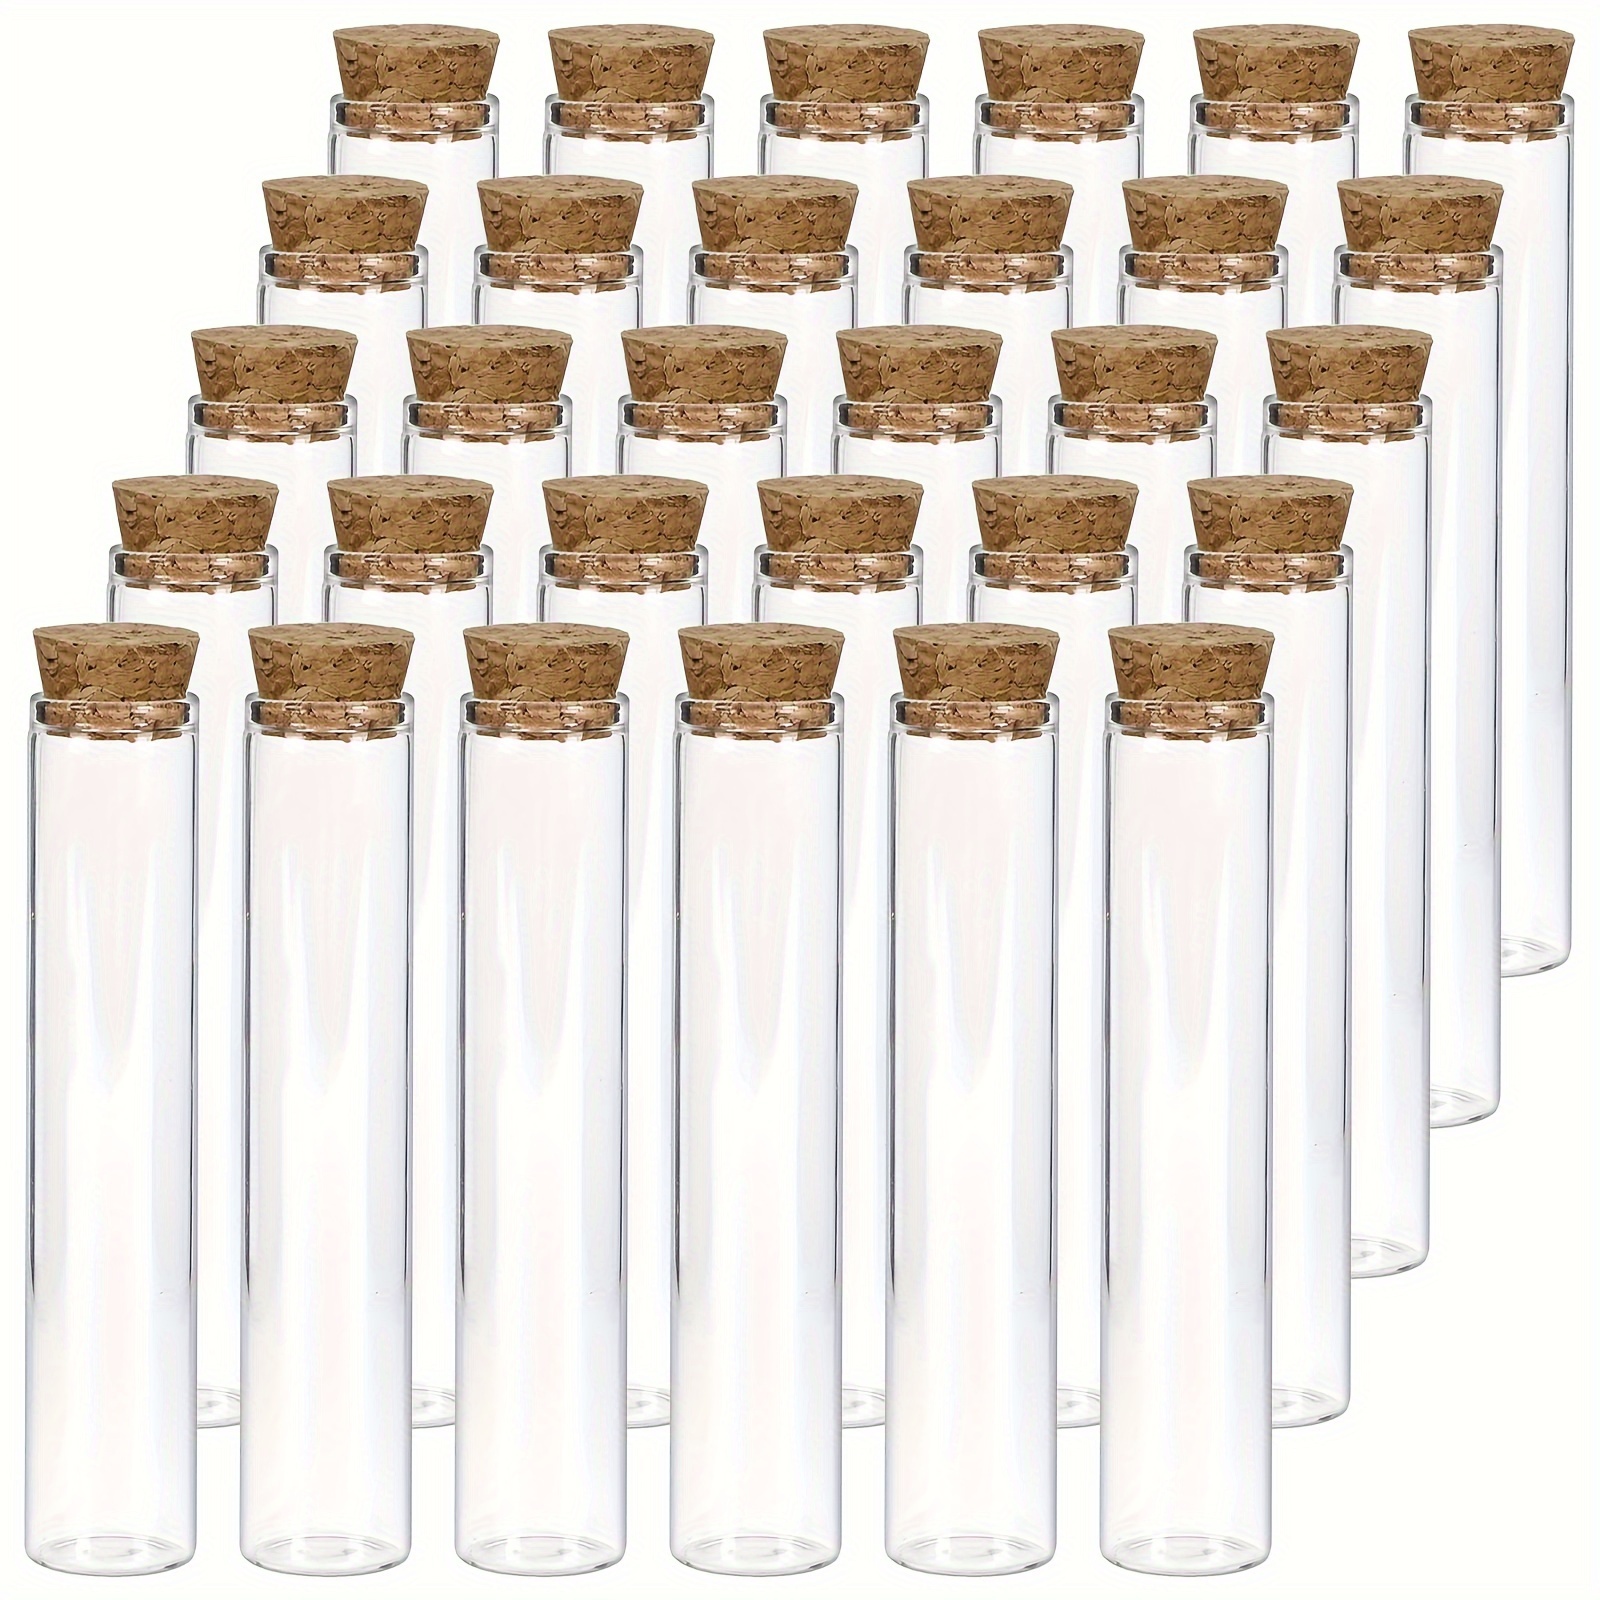 

30pcs 25ml Glass Test Tubes, Clear Flat Test Tubes With Cork Stoppers For Plants, Scientific Experiments, Bath Salt And Candy Storage, Store Liquid, Bath Salts, Powder, Candy, Sample